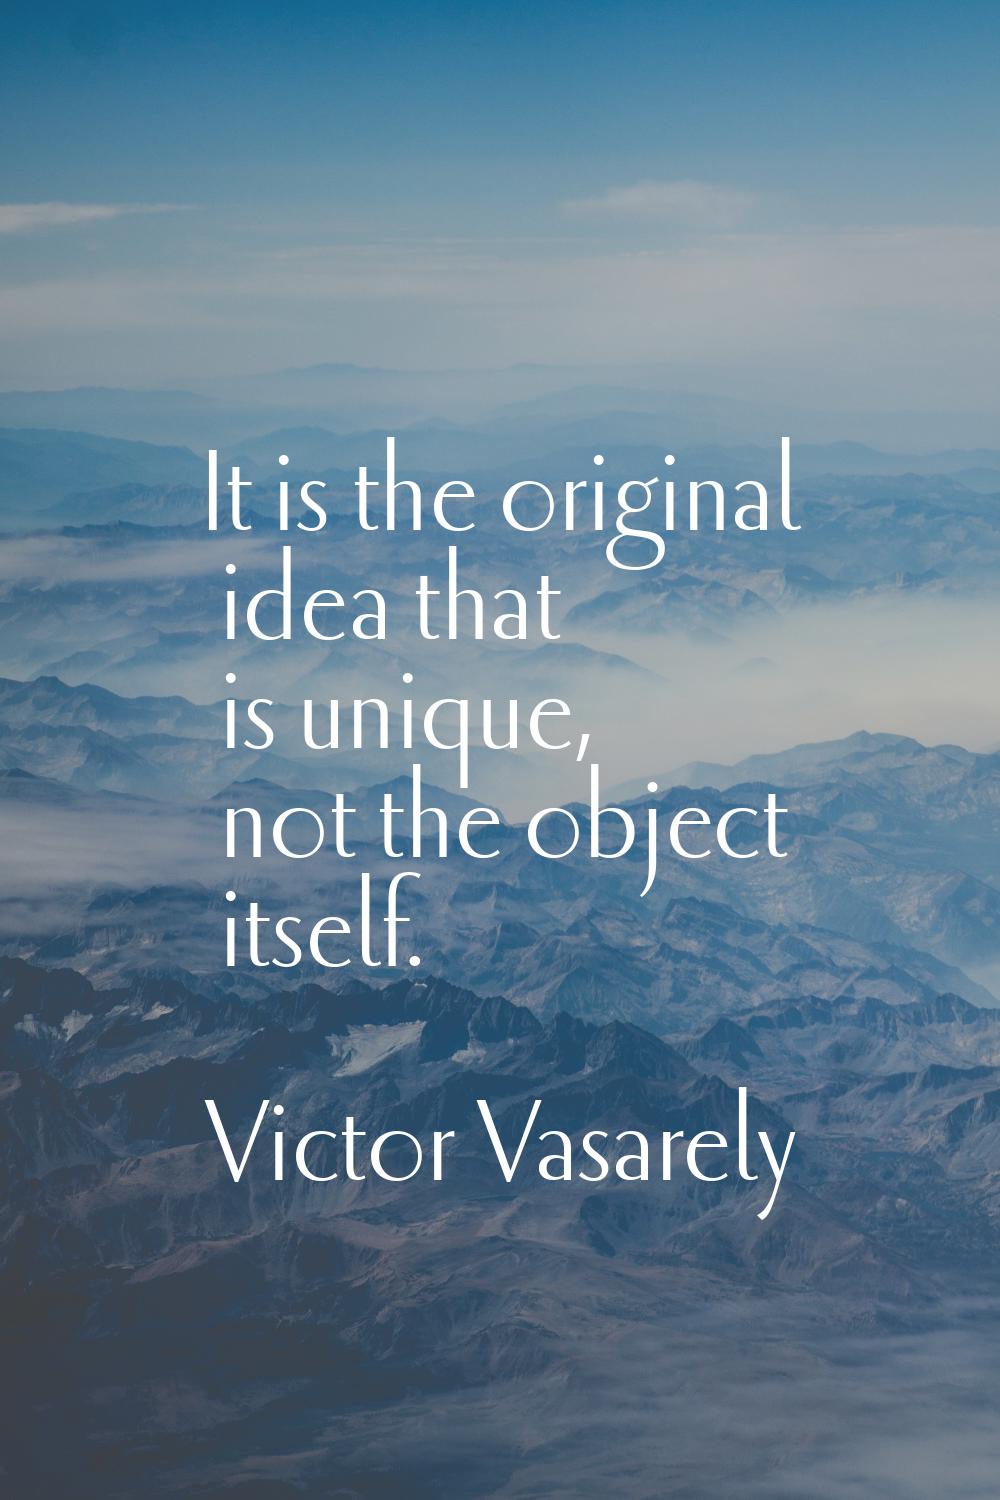 It is the original idea that is unique, not the object itself.